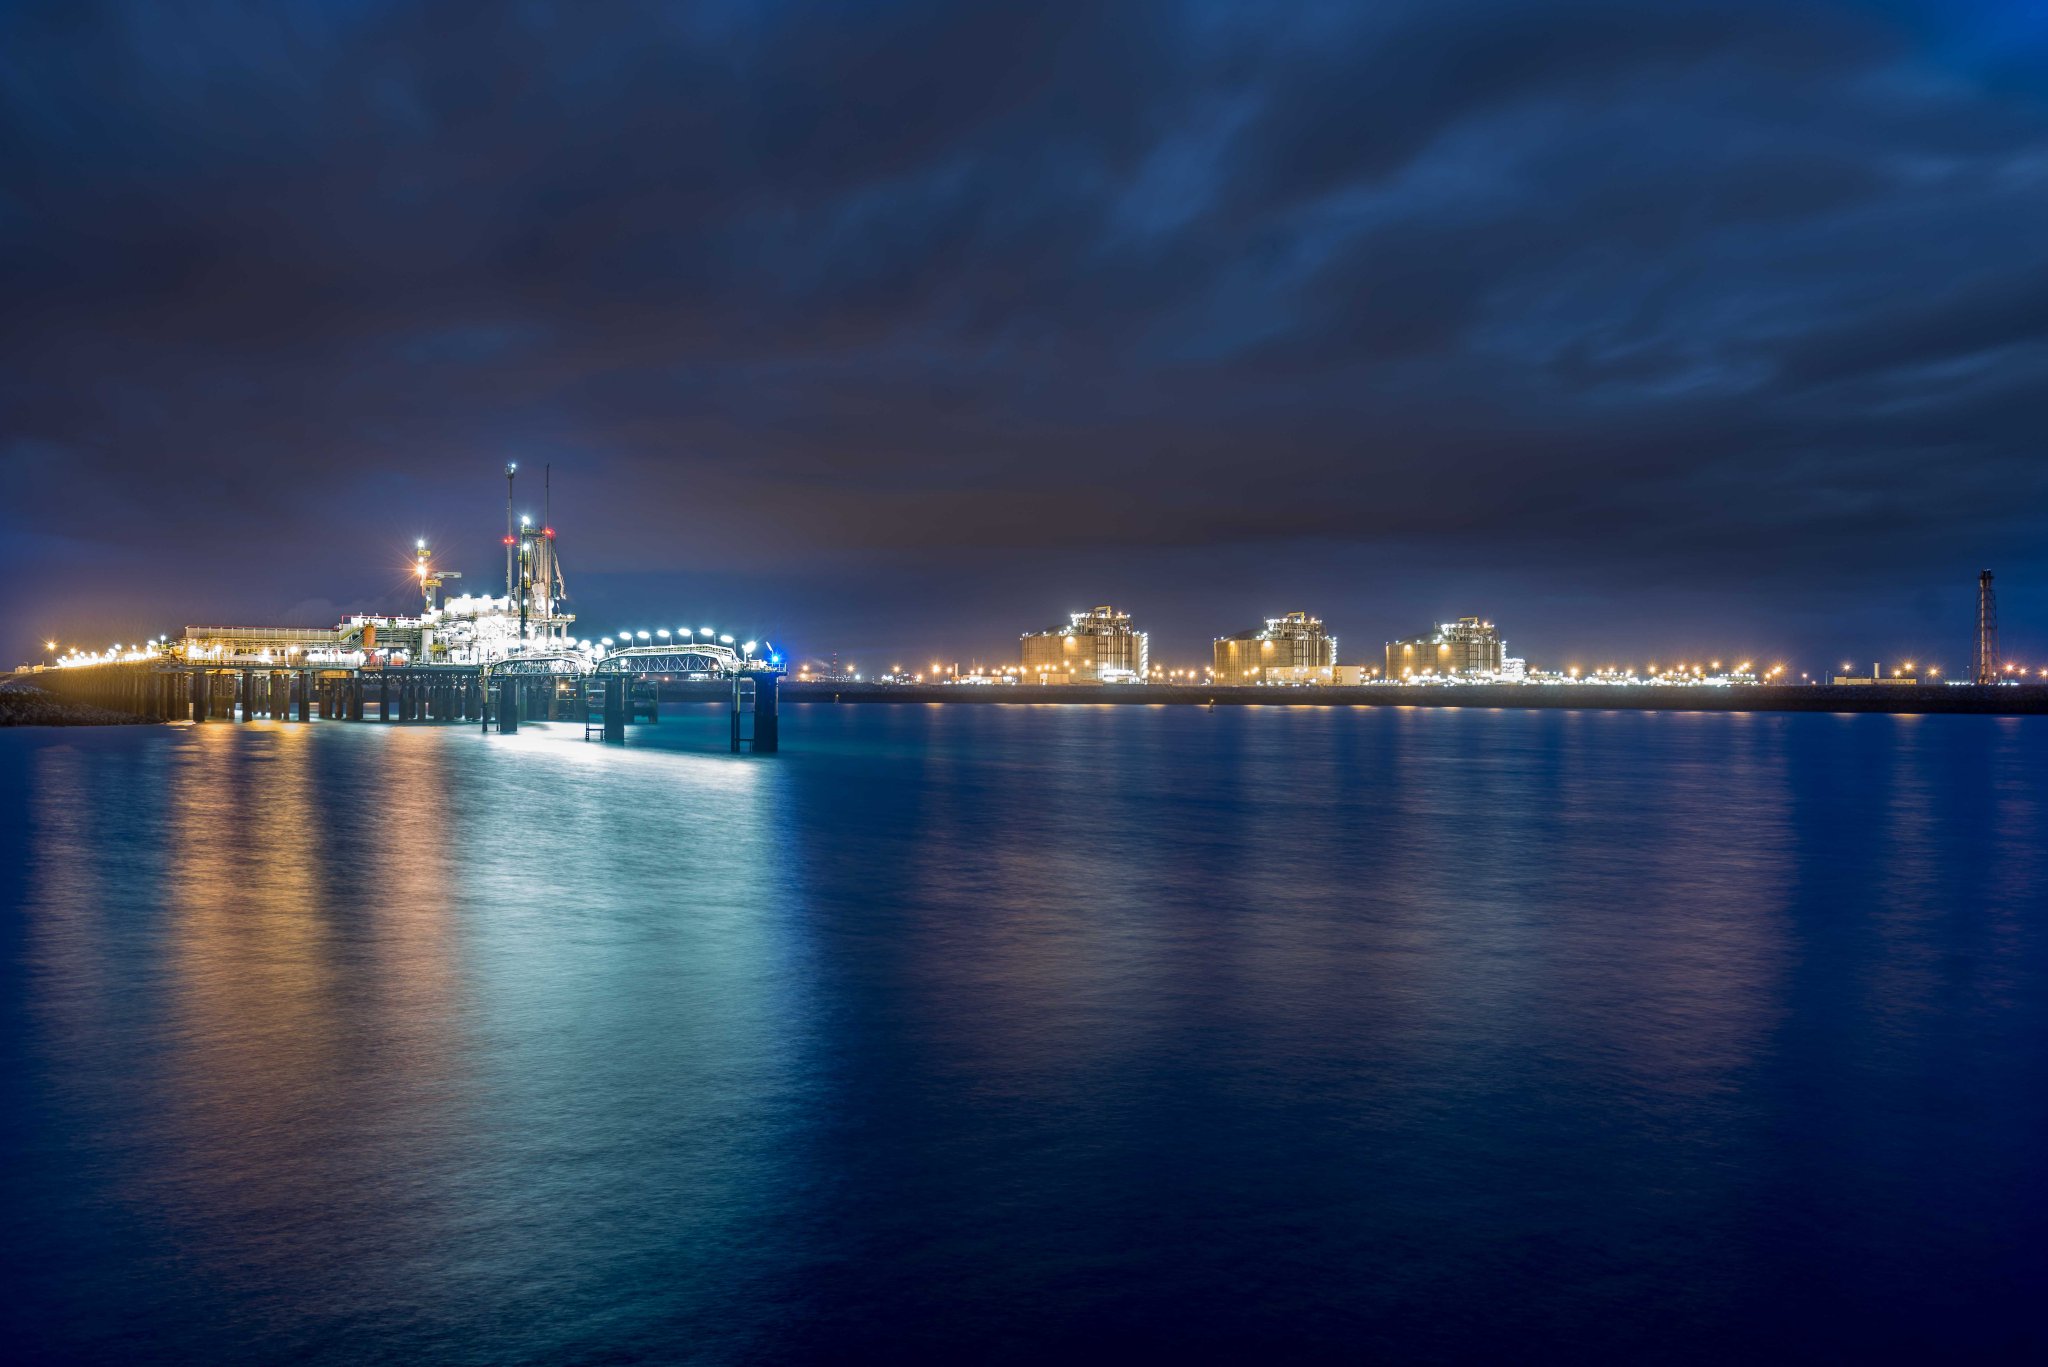 Dunkerque LNG starts works on upgrading reloading capacity, eyes small-scale jetty